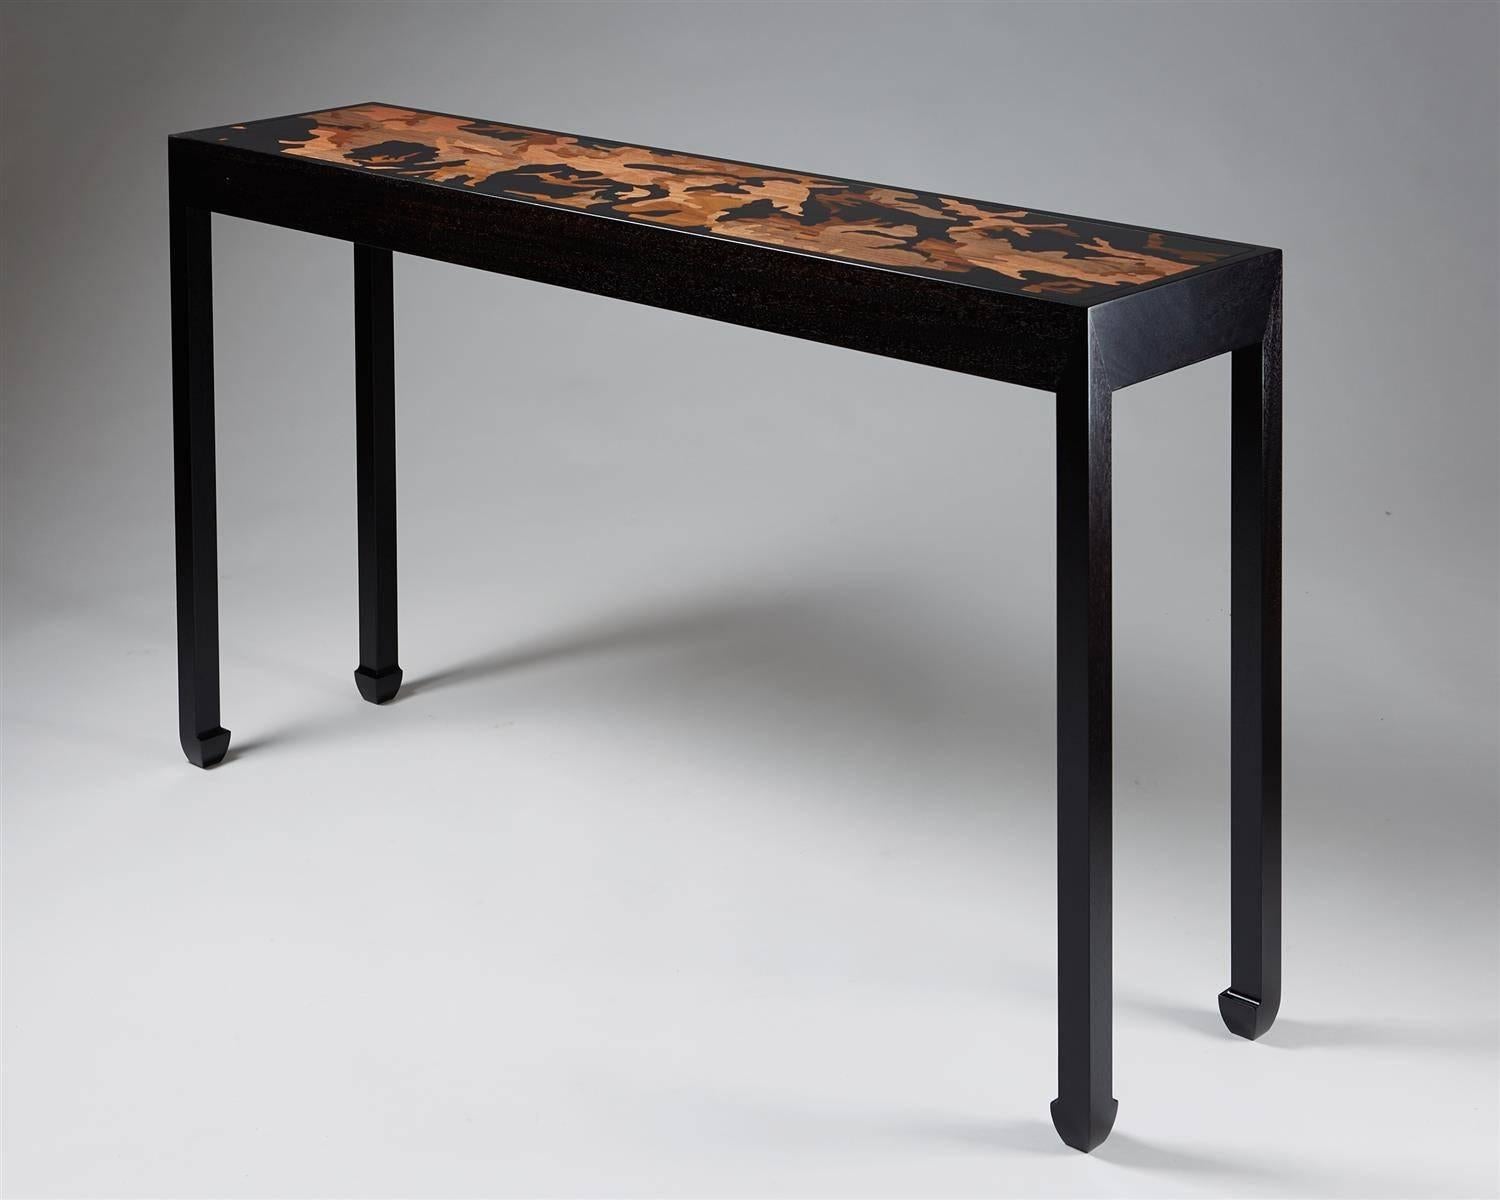 Console table designed by Morten Höeg Larsen, 
Denmark, 2015.

Ebonized wood and various wood inlays.

One of a pair.